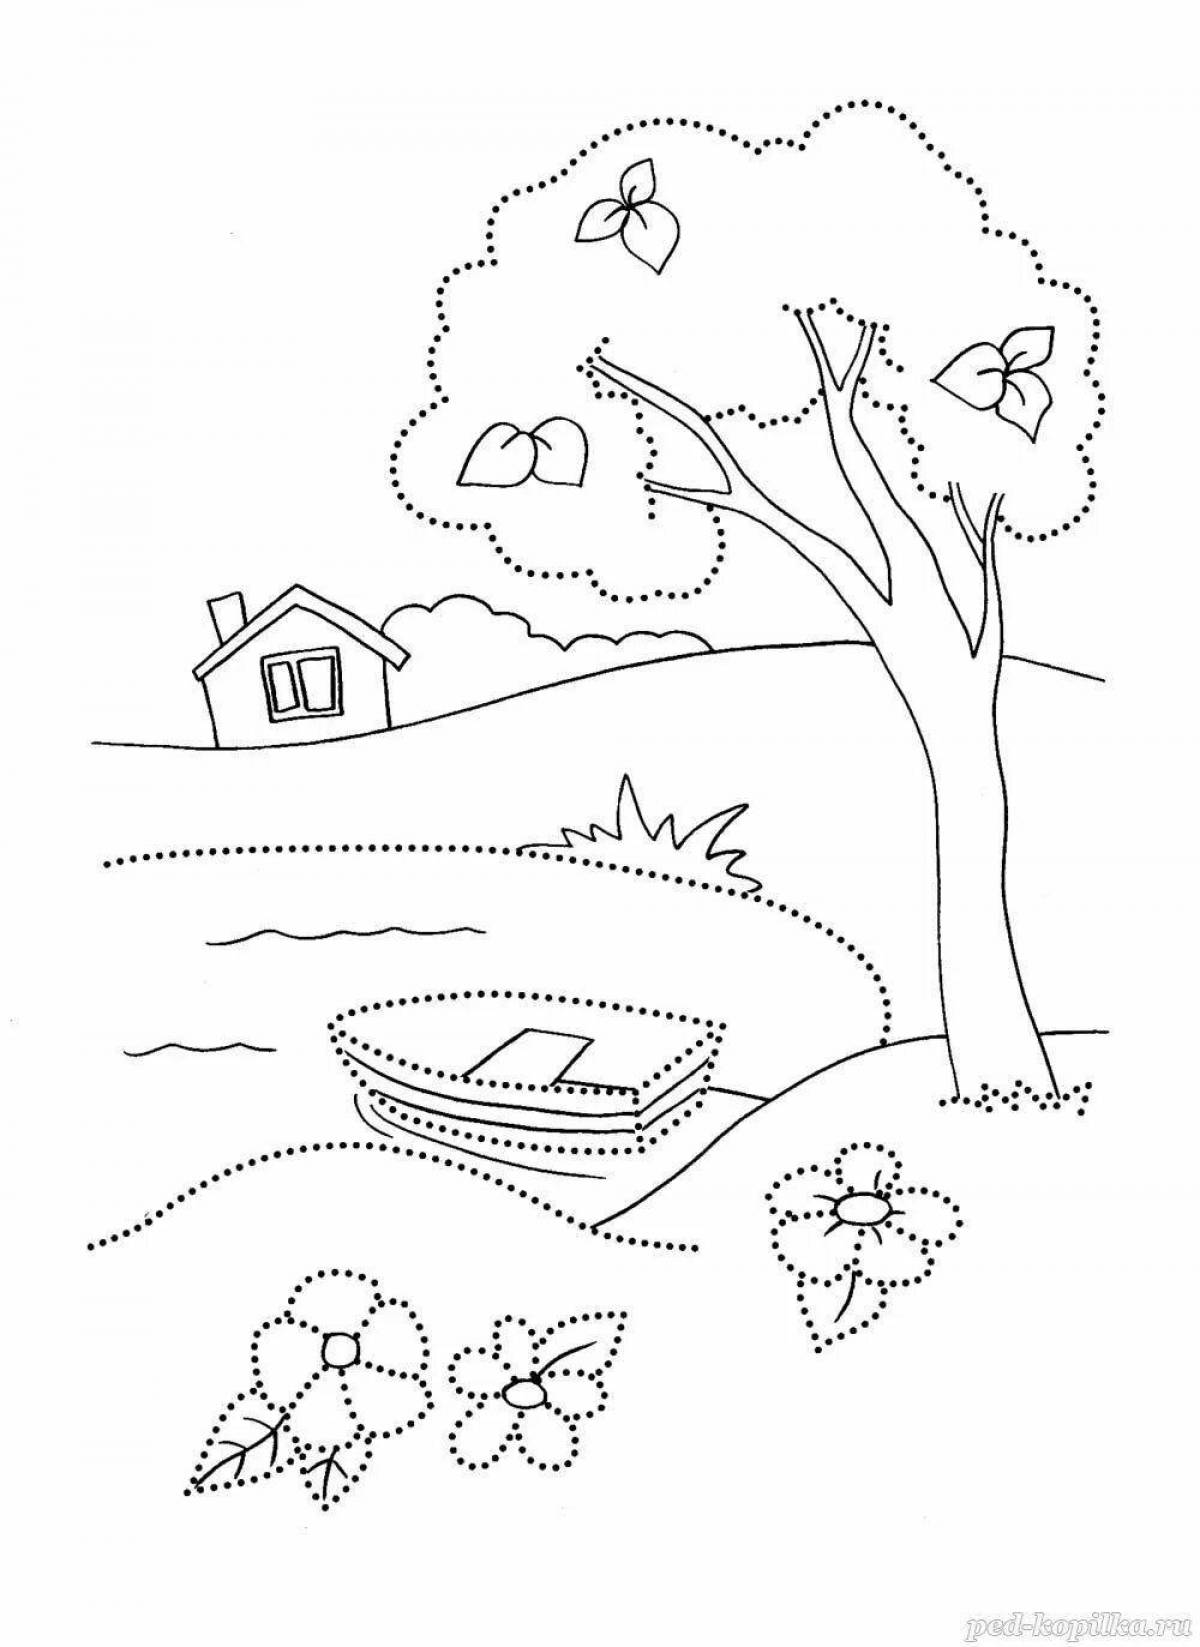 A playful nature coloring book for 3-4 year olds